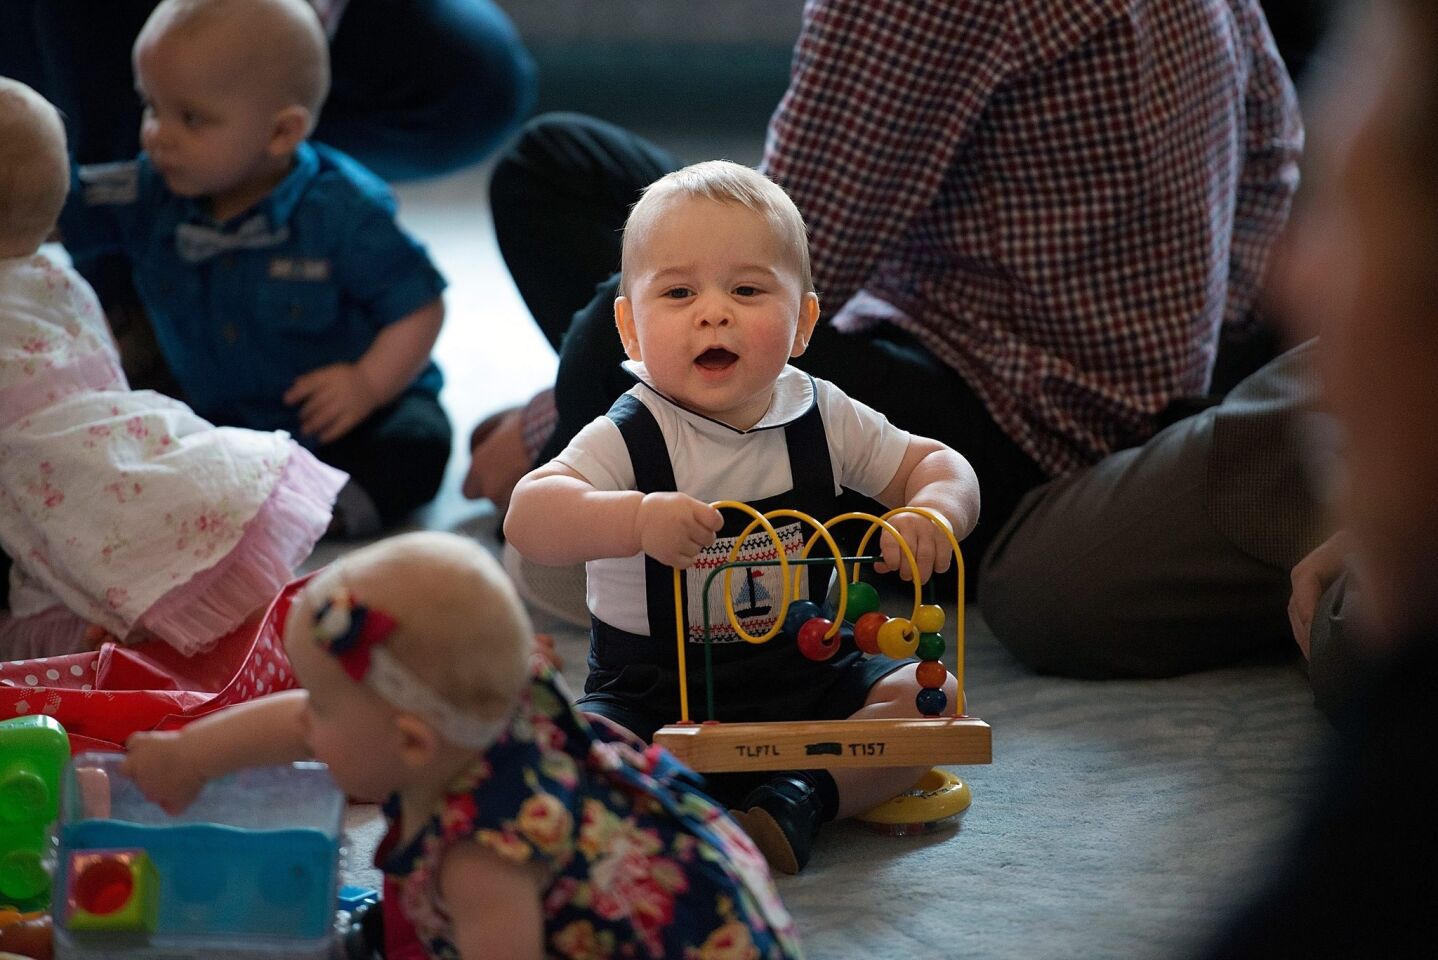 Prince George plays with toys during a play date at Government House in Wellington, New Zealand.